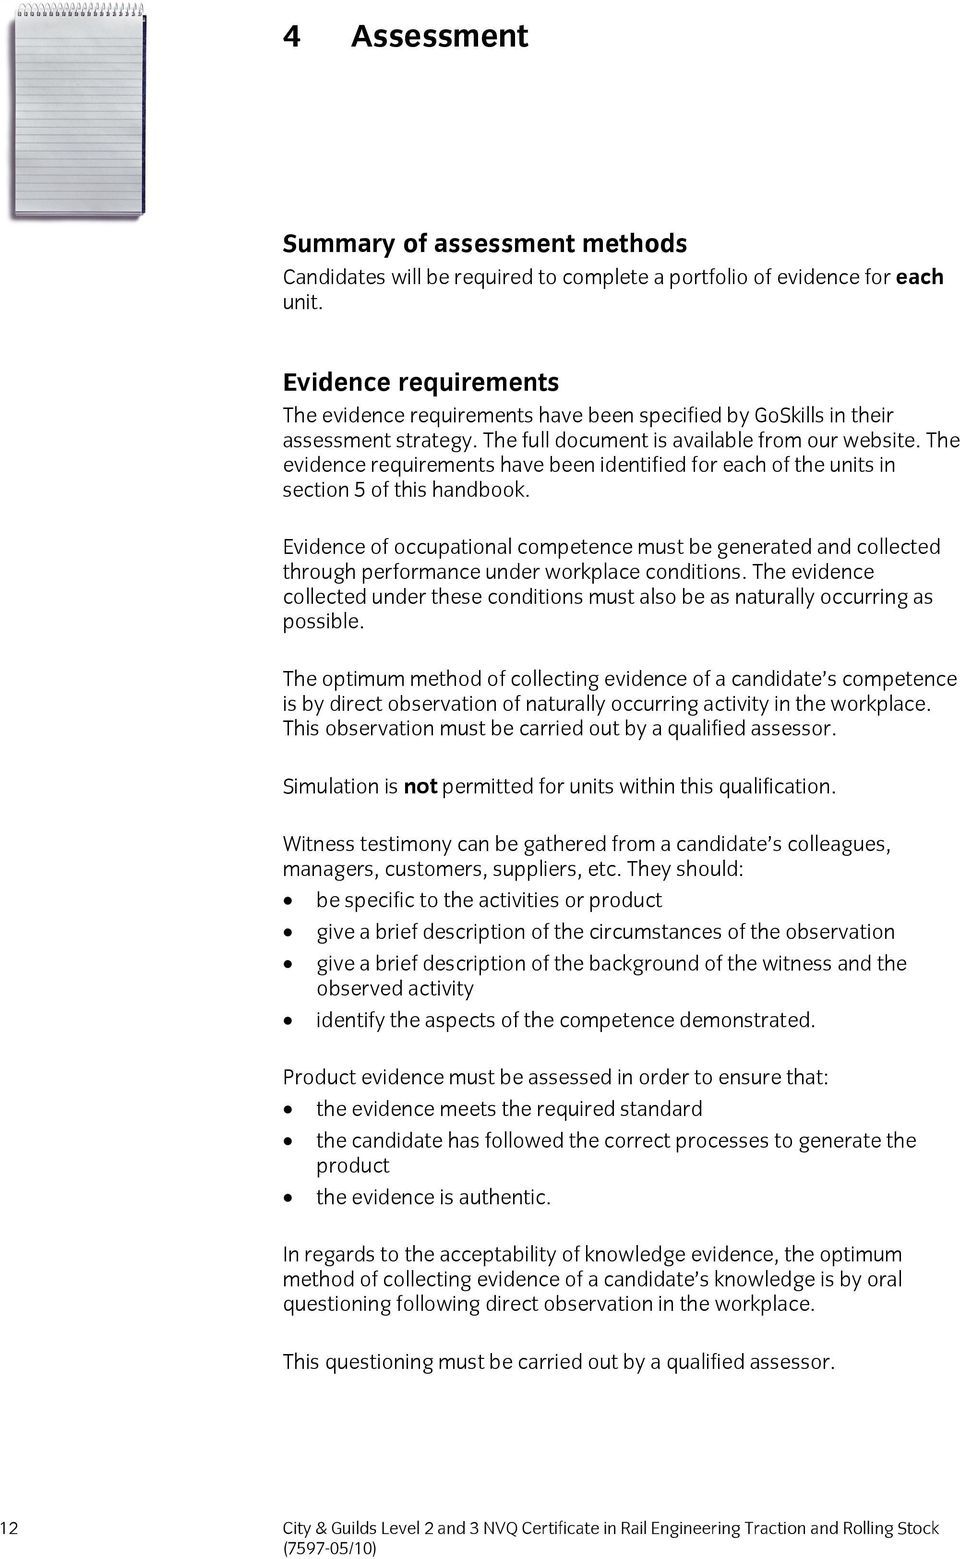 The evidence requirements have been identified for each of the units in section 5 of this handbook.